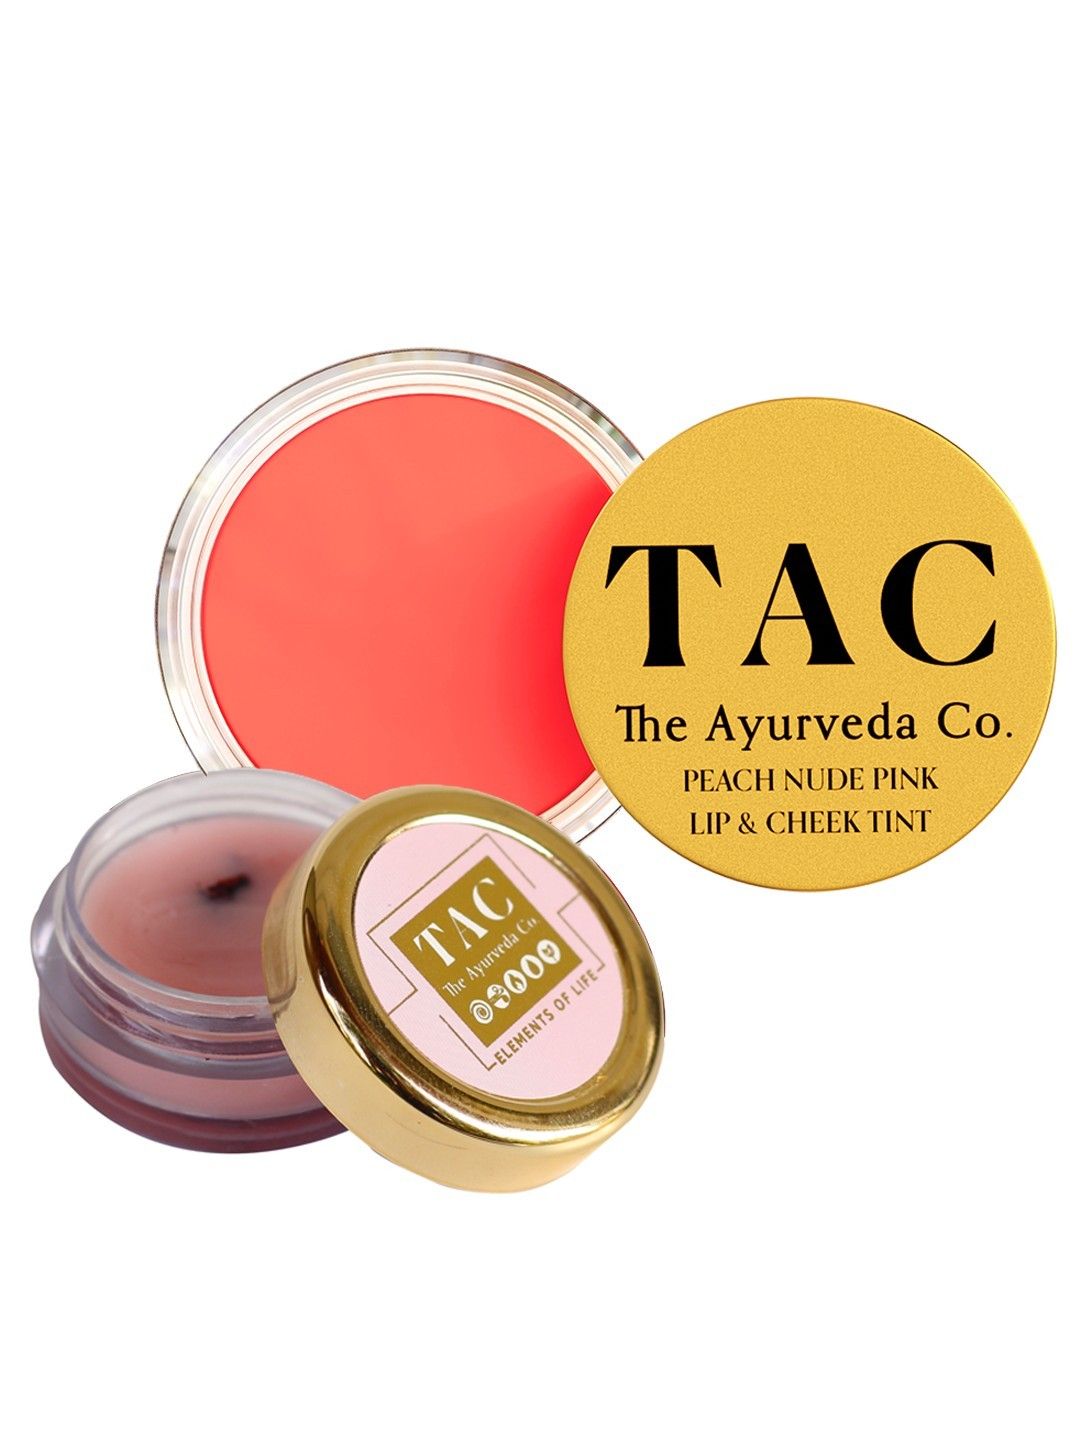 TAC - The Ayurveda Co. Peach Lip And Cheek Tint & Rose Petal Lip Balm with Organic Beeswax Price in India